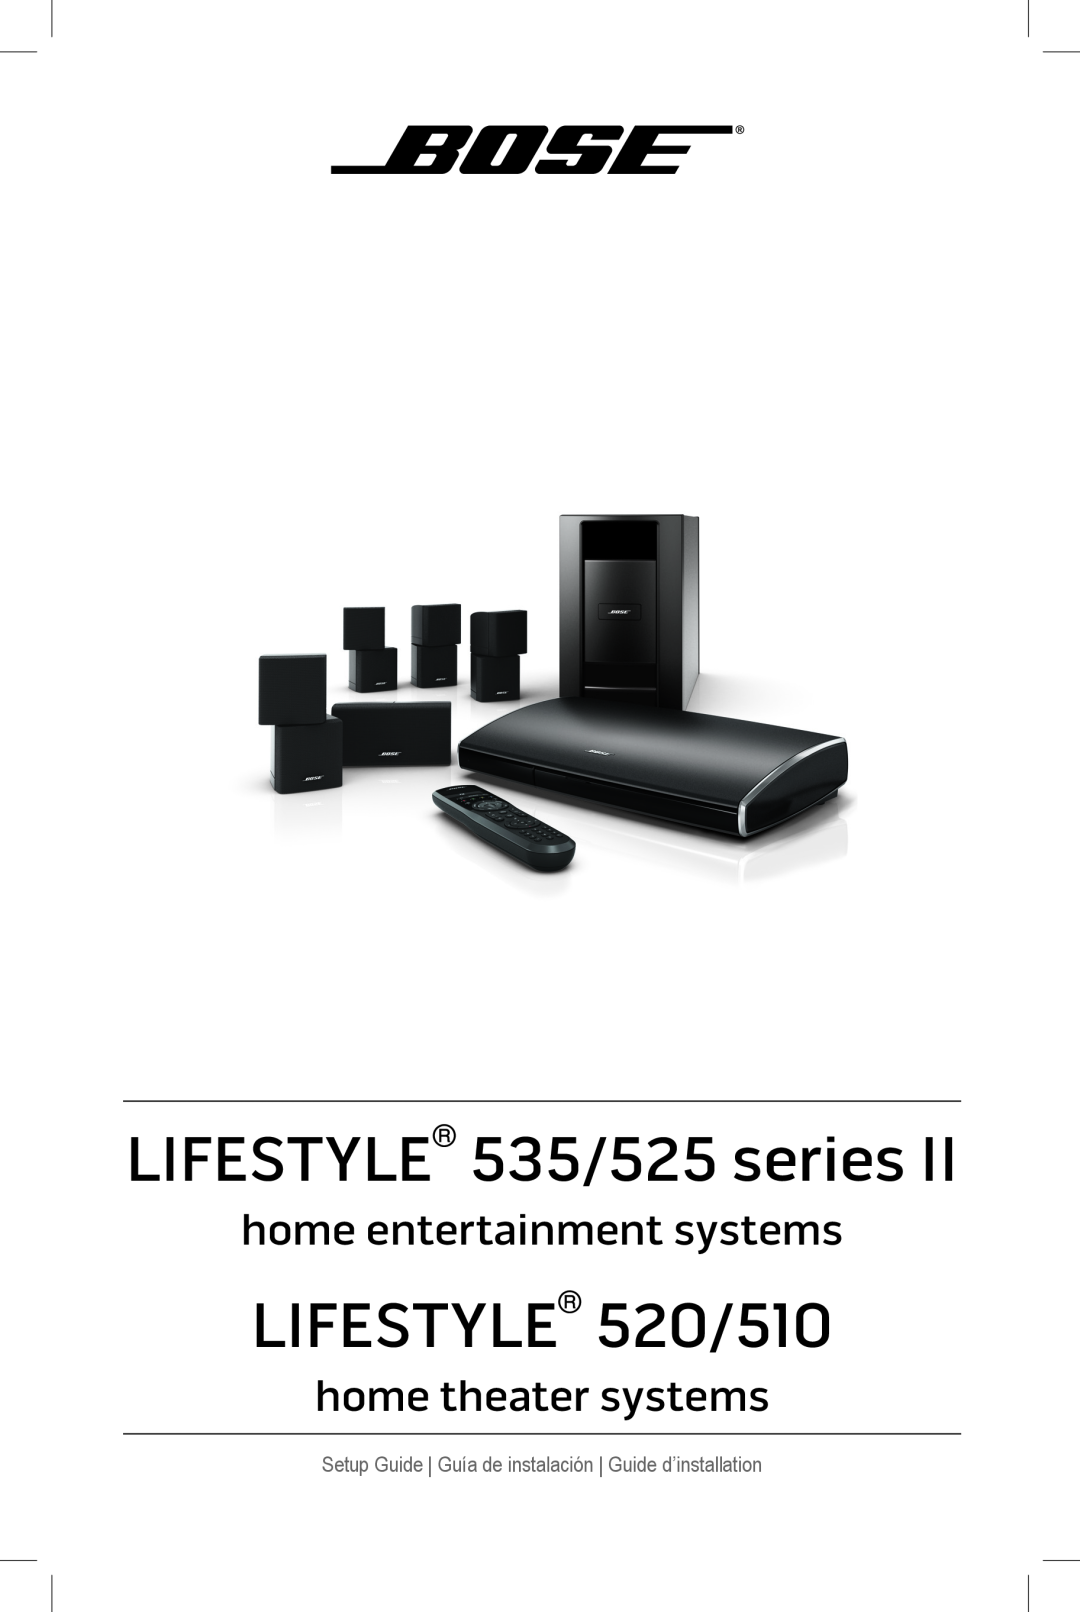 Bose setup guide LIFESTYLE 535/525 series, LIFESTYLE 520/510, home entertainment systems, home theater systems 